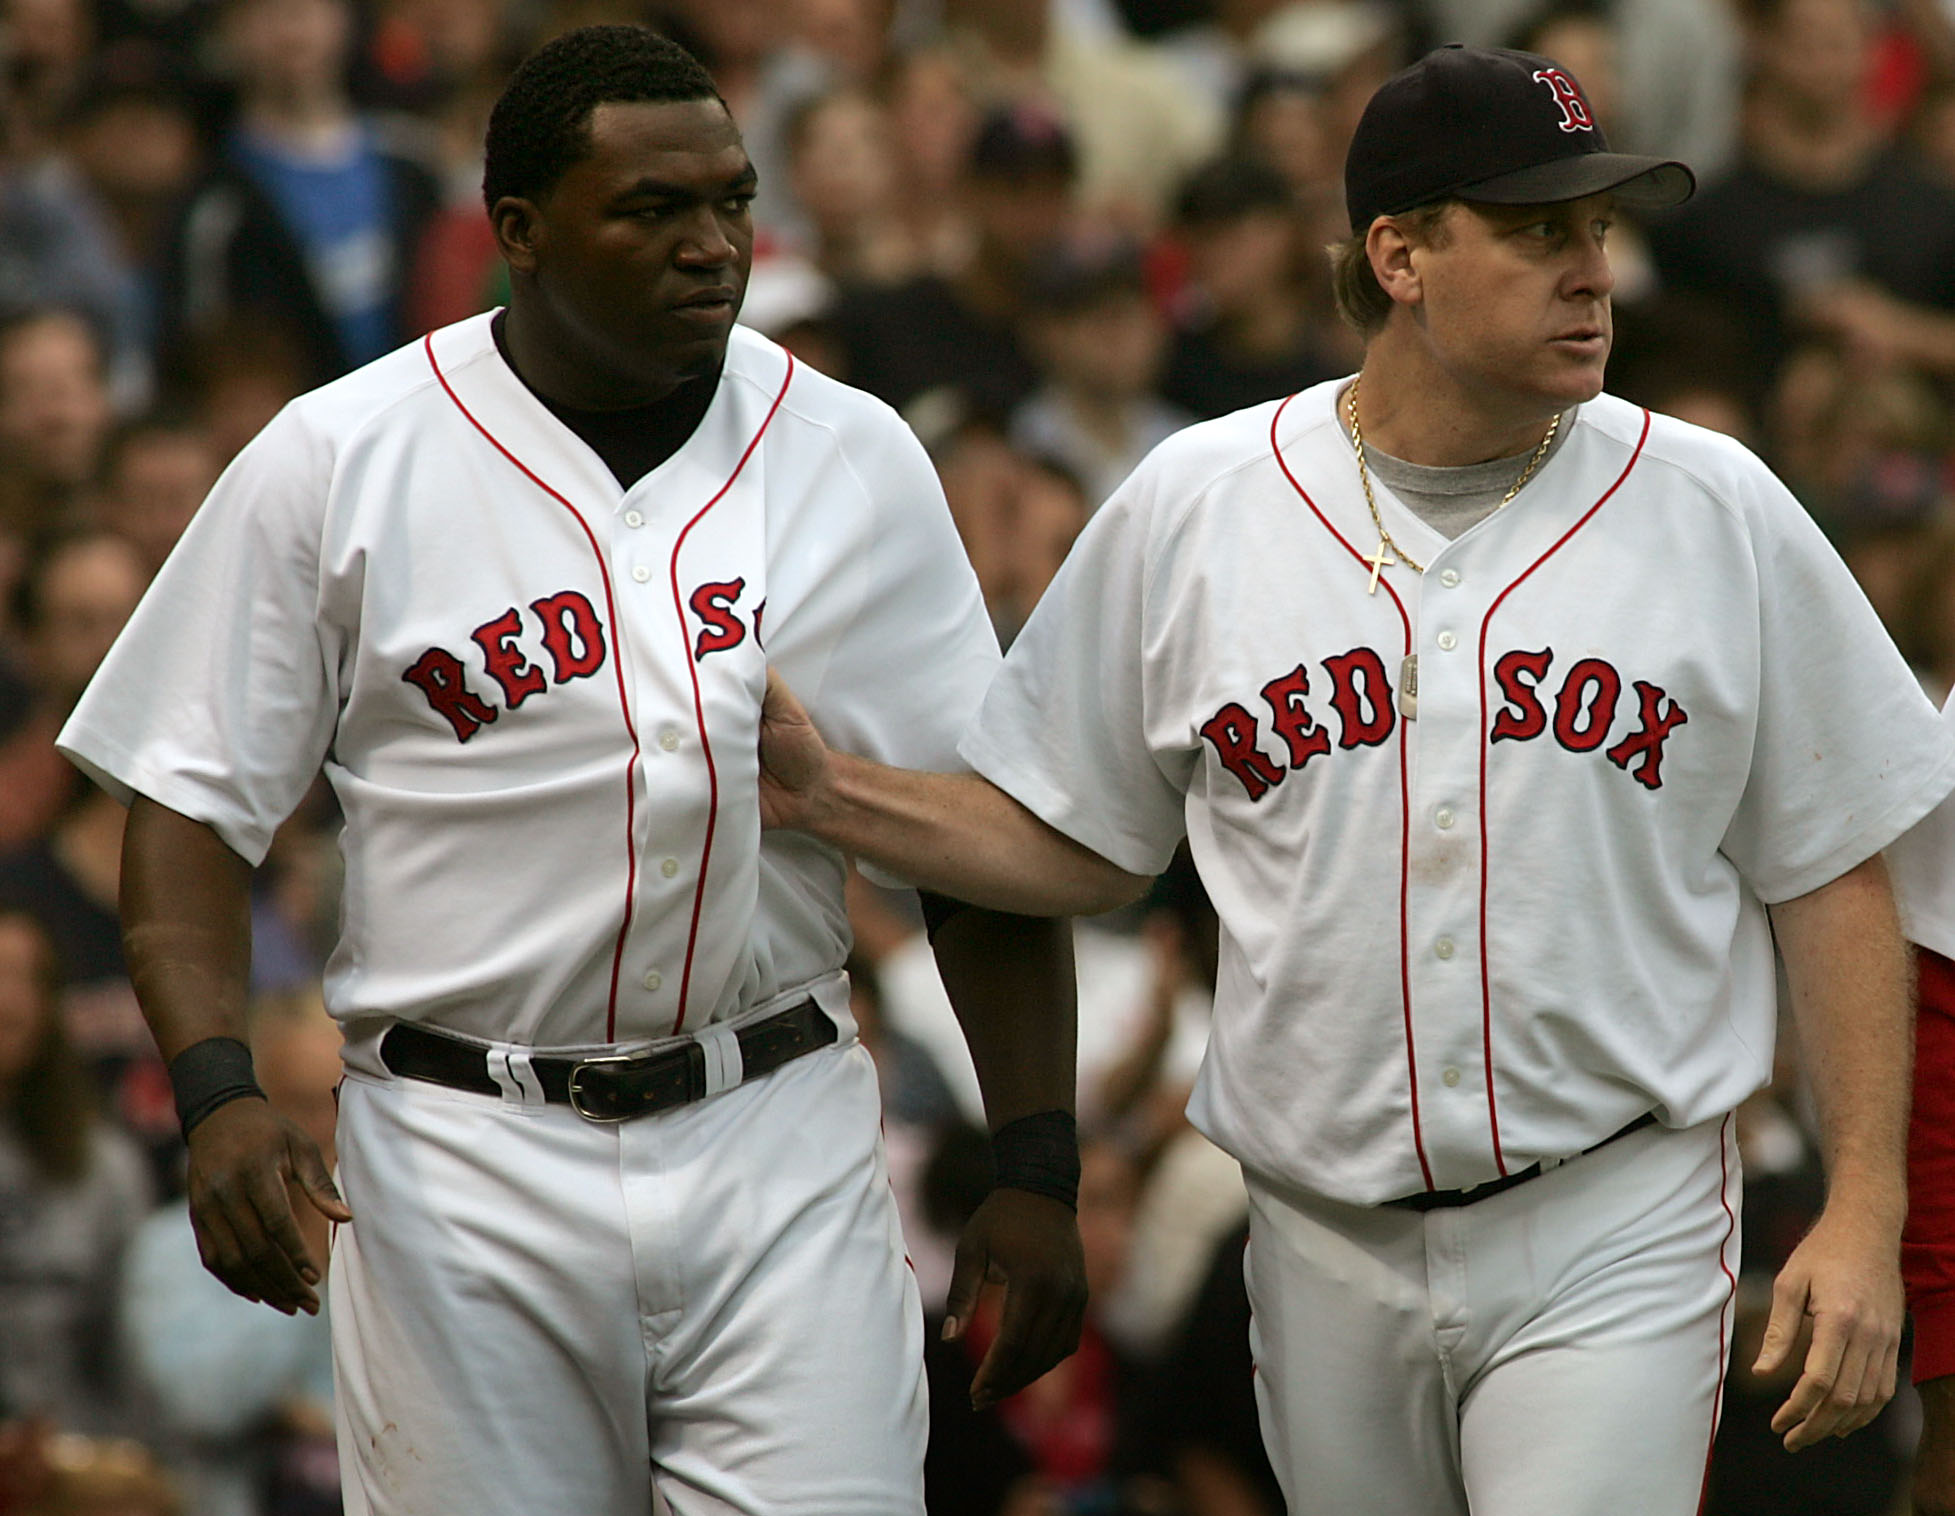 Curt Schilling doesn't care what you think as Hall of Fame vote looms